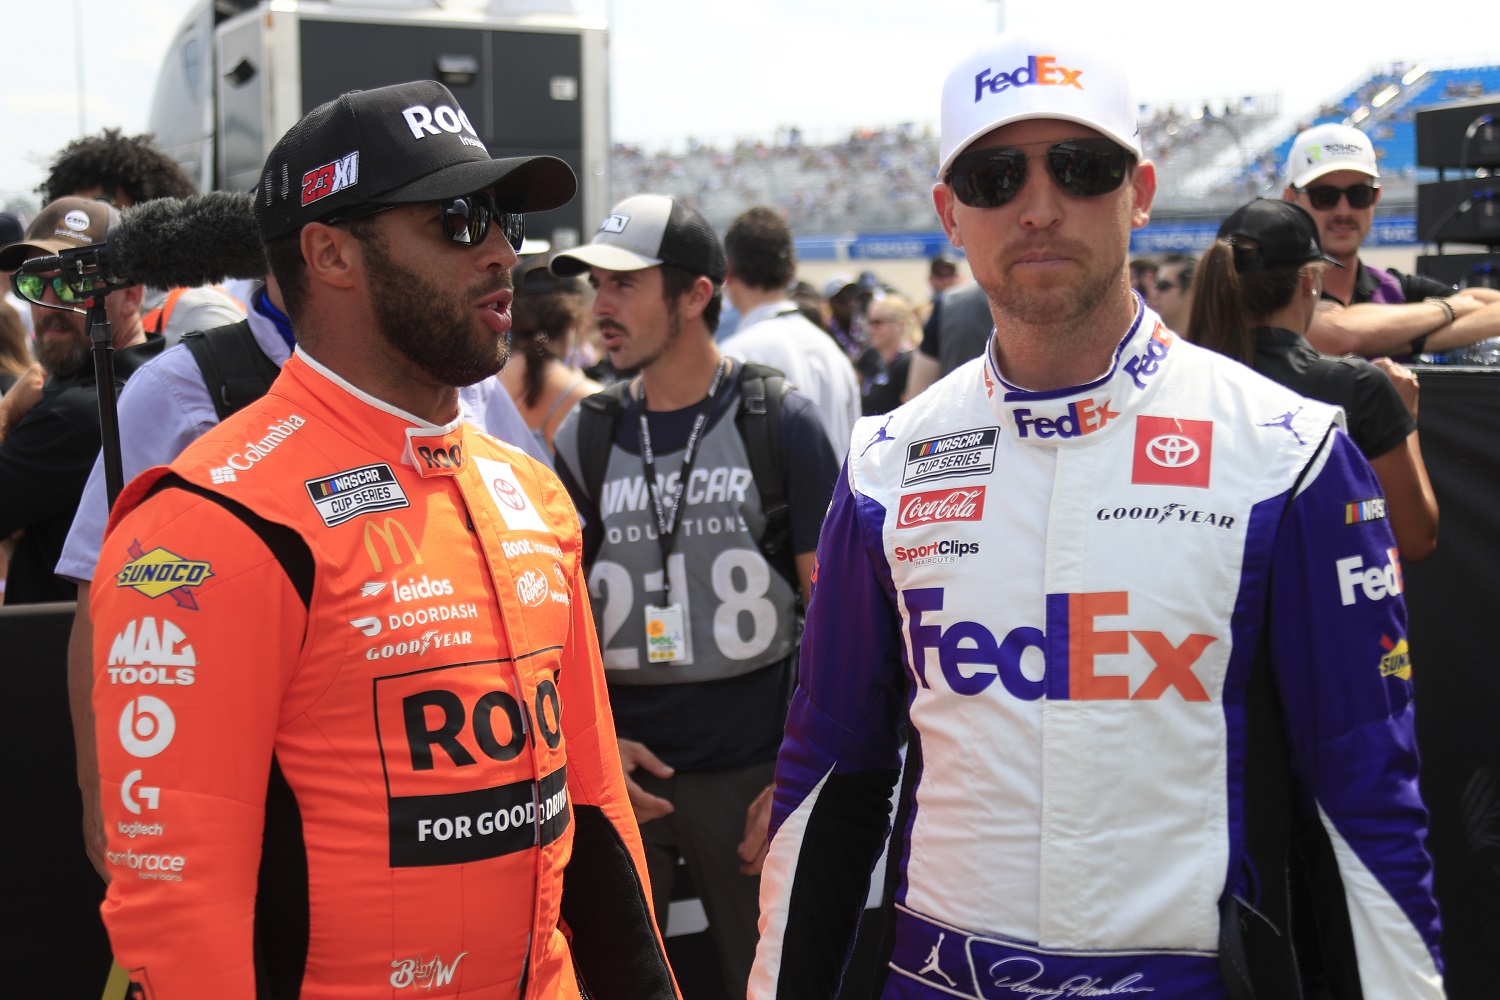 Bubba Wallace talks with Denny Hamlin during driver introductions prior to the NASCAR Cup Series Ally 400 on June 26, 2022, at Nashville SuperSpeedway. | Jeff Robinson/Icon Sportswire via Getty Images